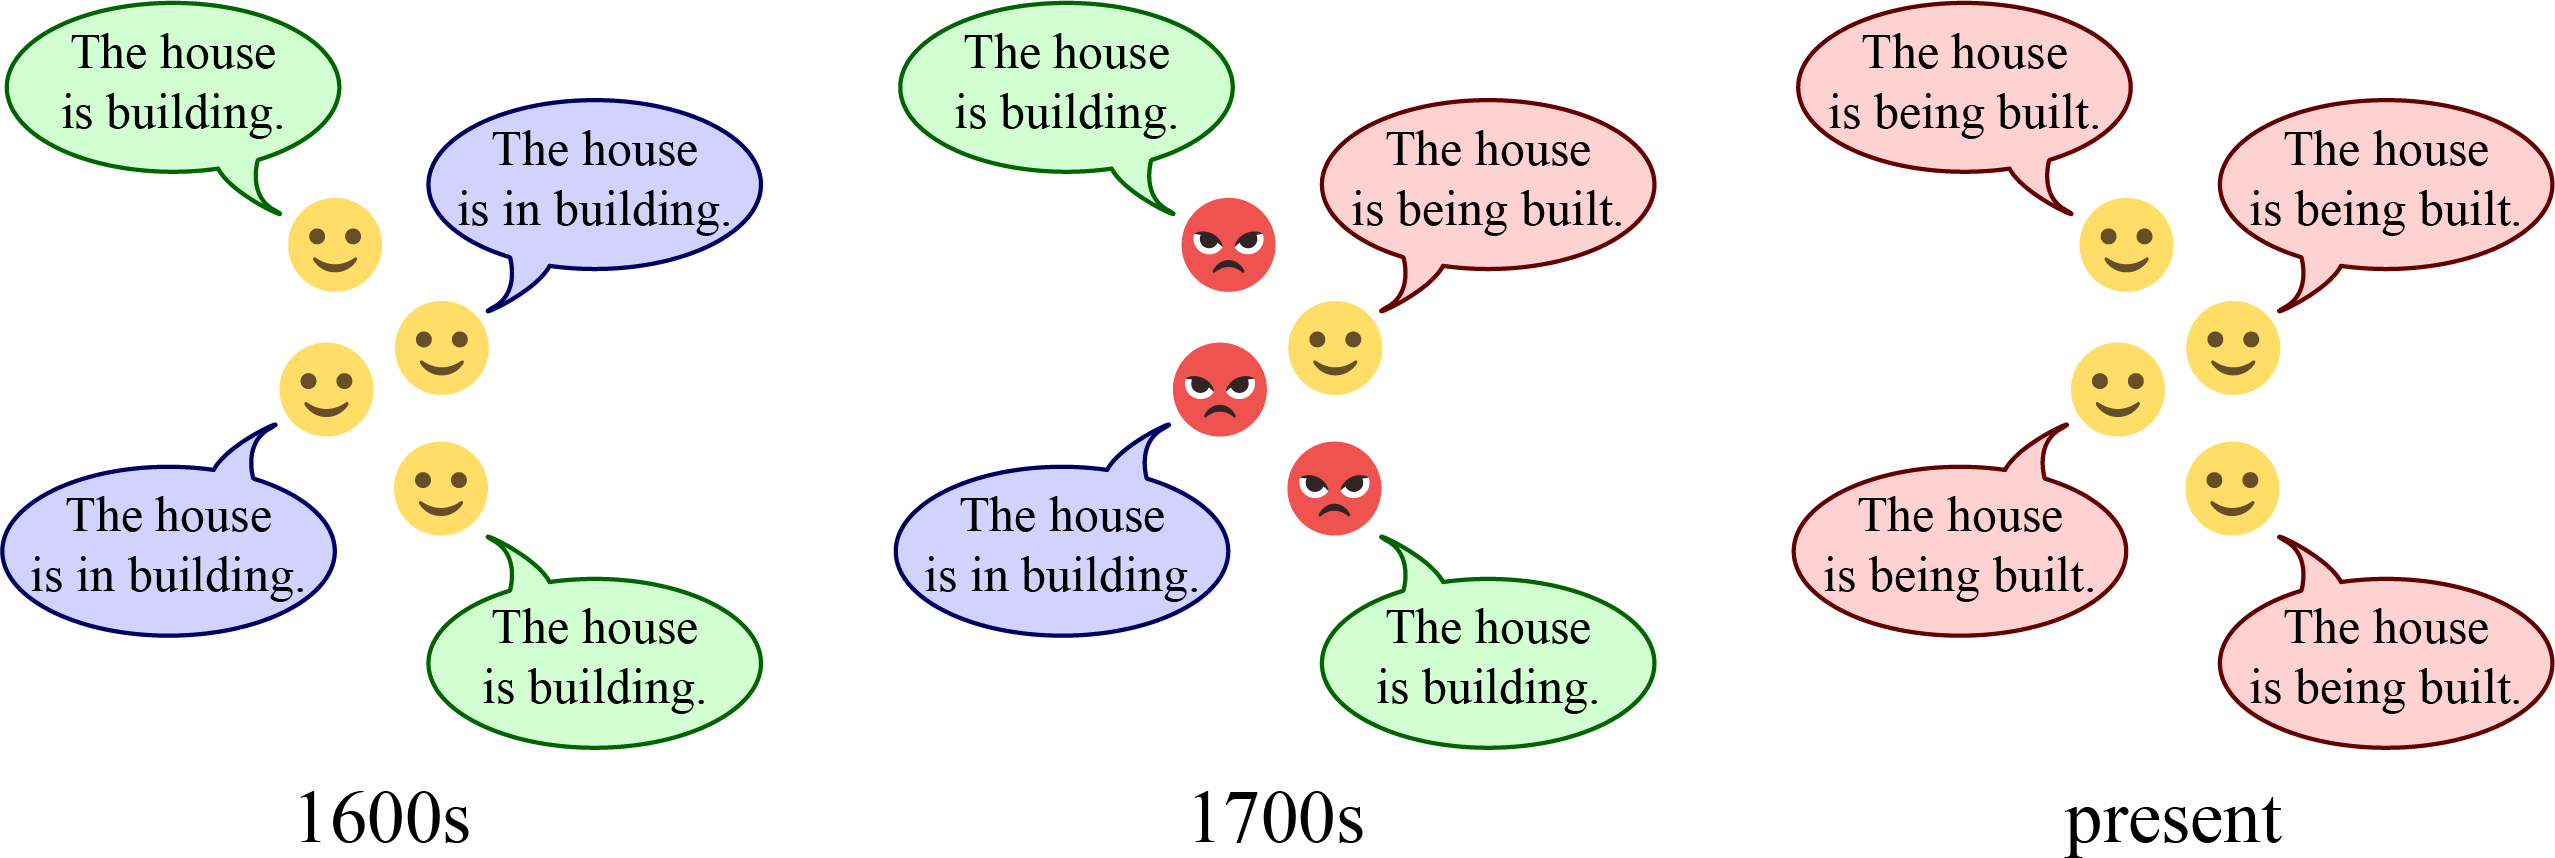 Three sets of emoticon faces with coloured speech bubbles. The first set labelled "1600s" has four happy faces saying a mix of "the house is building" in green and "the house is in building" in blue. The second set labelled "1700s" has three angry faces saying a mix of same but with a happy face saying "the house is being built" in pink. The third set labelled "present" has four happy faces all saying "the house is being built" in pink.